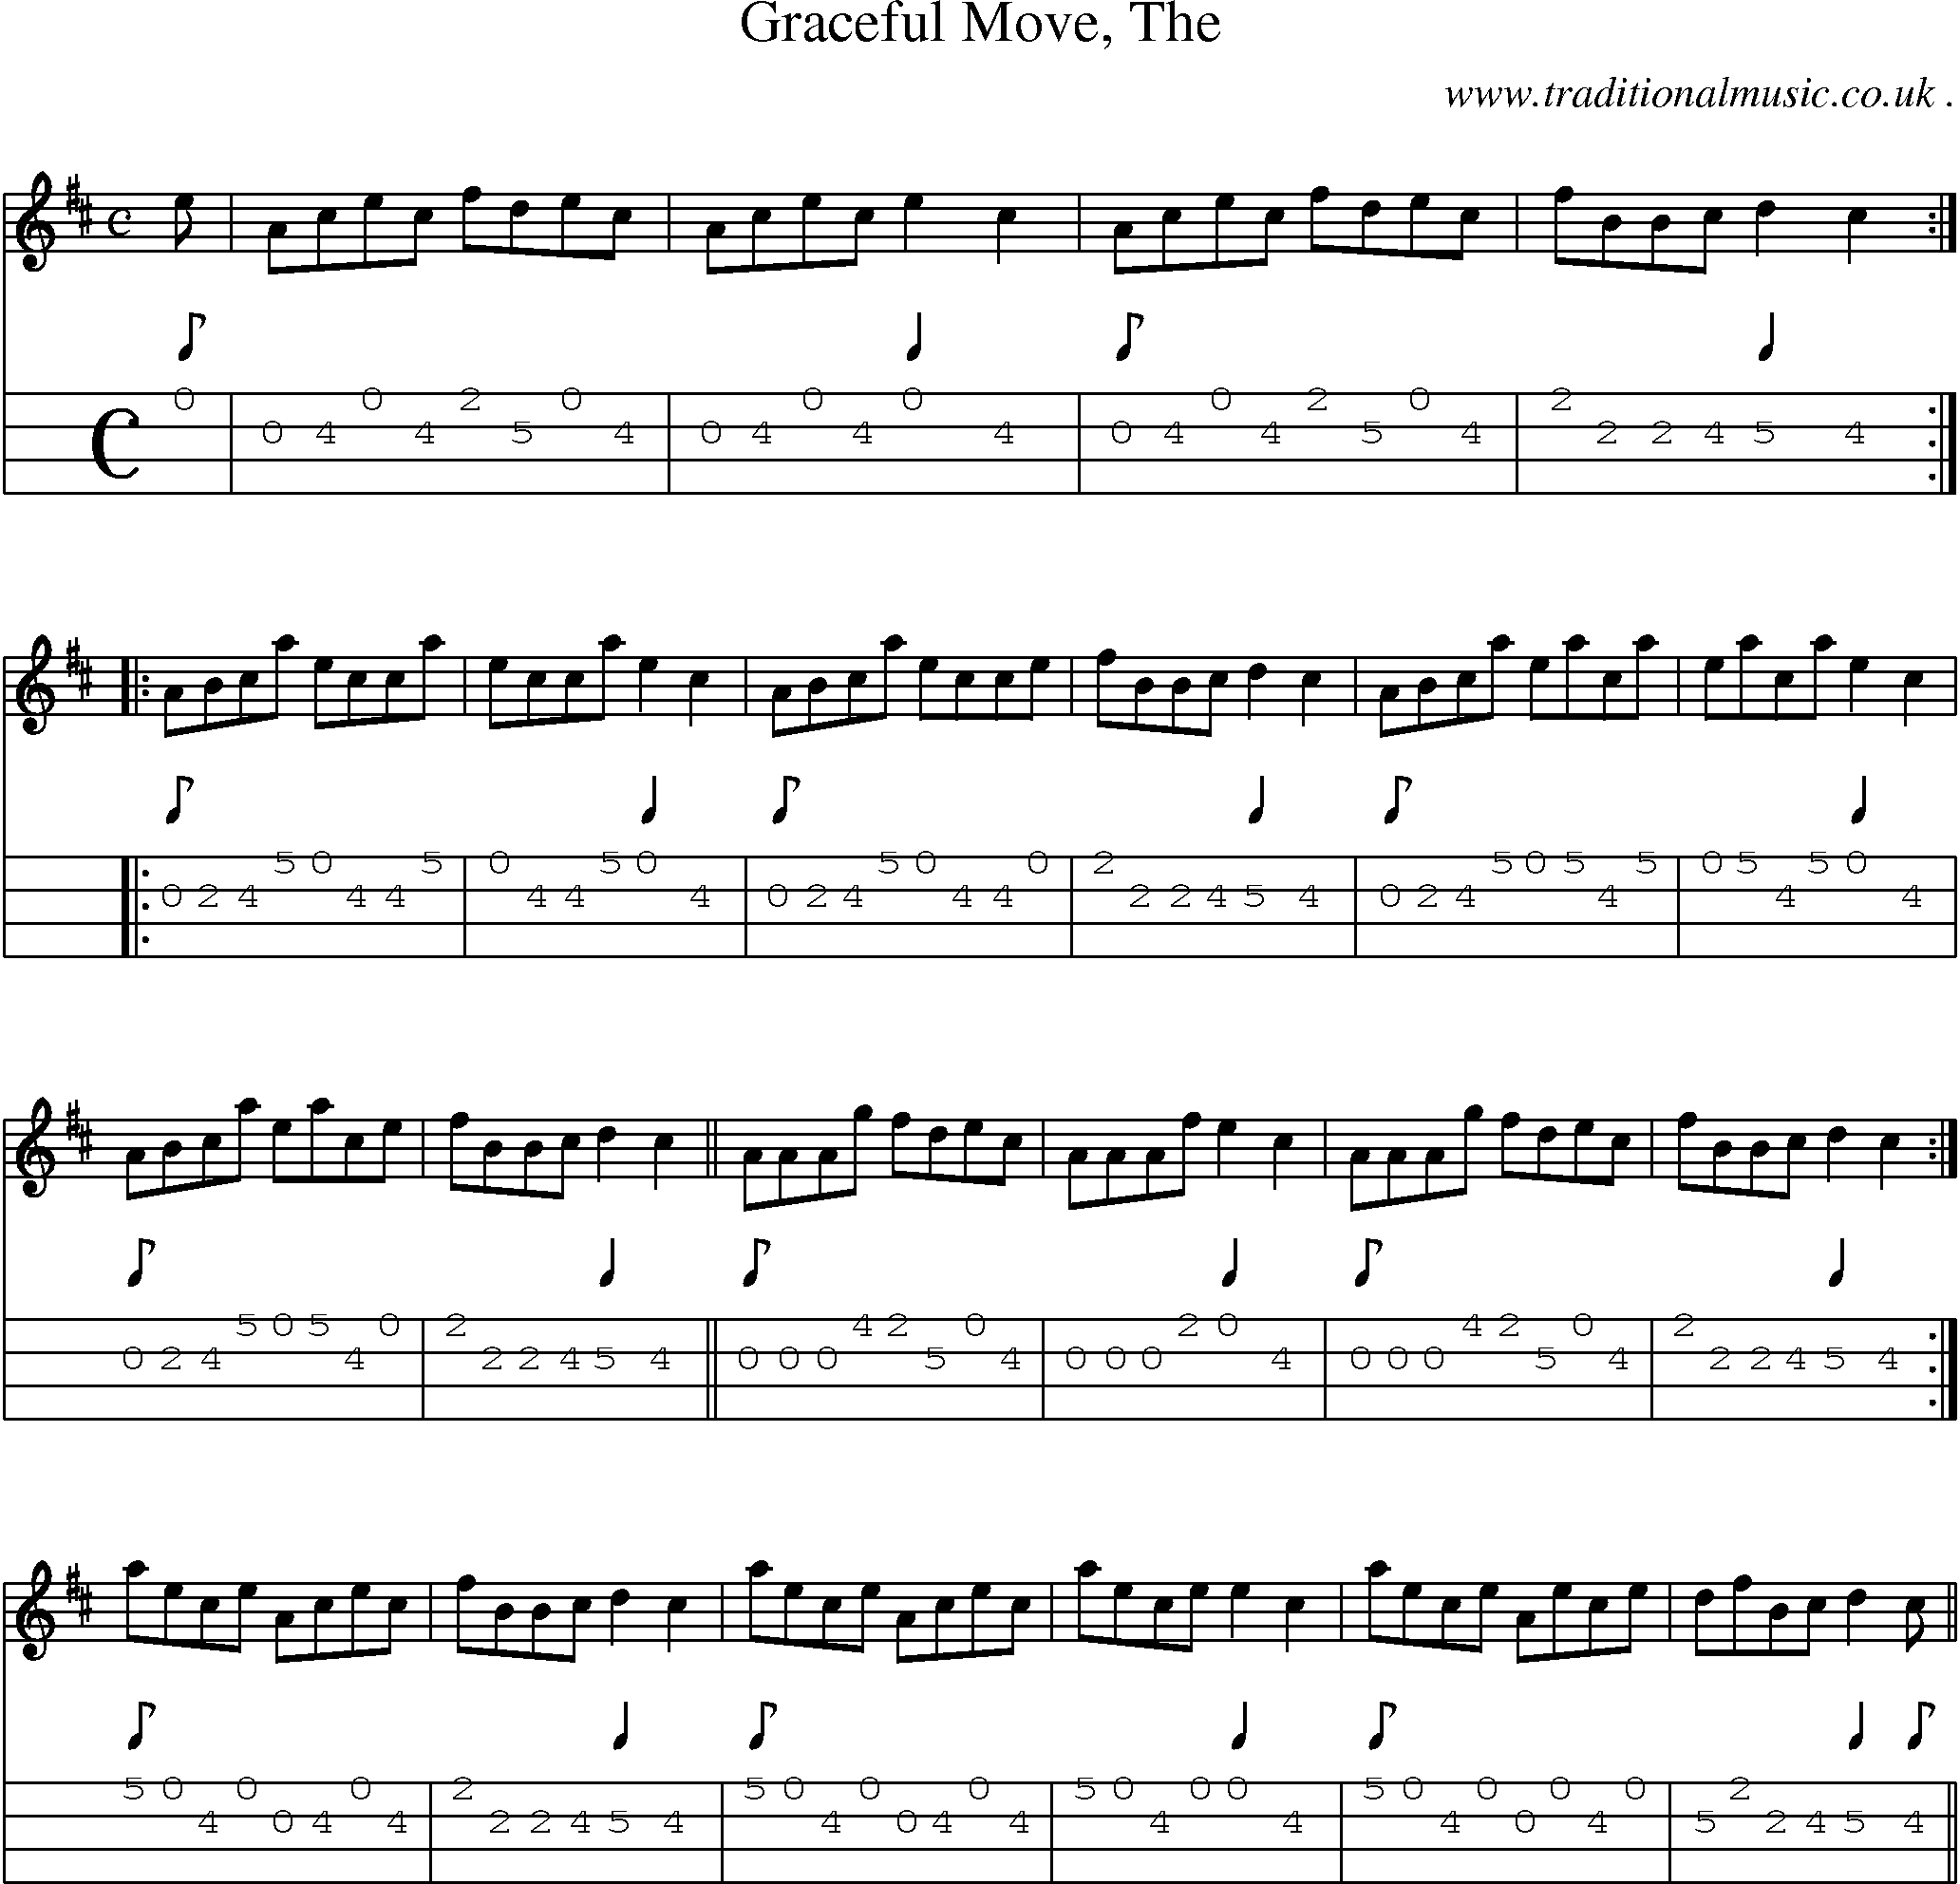 Sheet-music  score, Chords and Mandolin Tabs for Graceful Move The